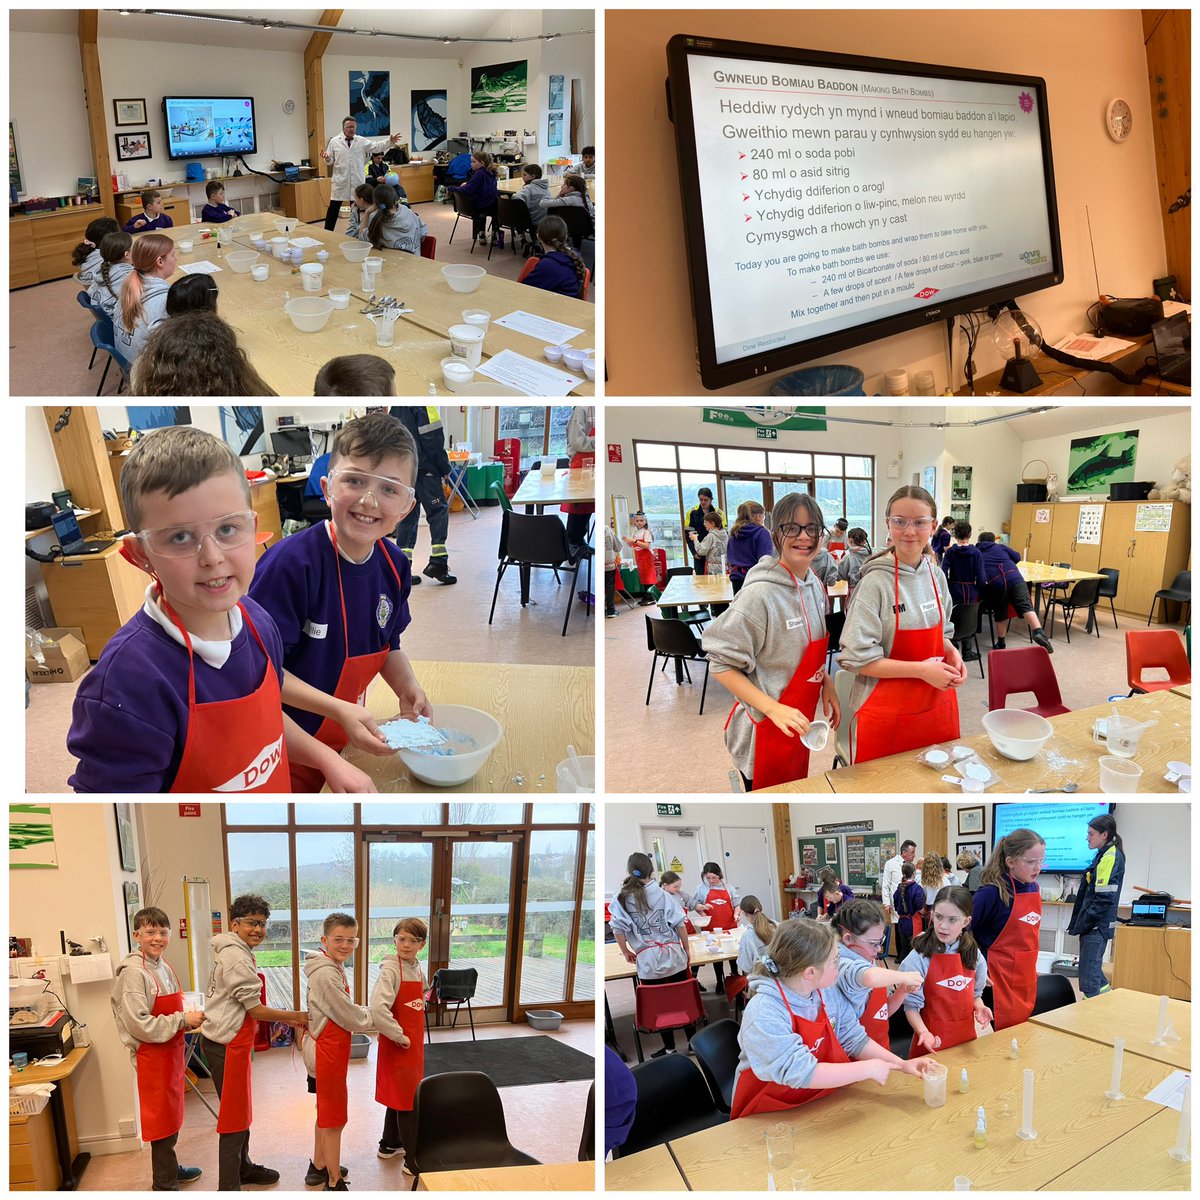 Year 5&6 enjoying celebrating national science week . Creating bath bombs and scented soap jels ! Thanks to staff @dowsilicones for the welcome. @MissALiney1 @MissNWT123 @MrLlwyd2 @1MrMPrice @ygsantcurig1